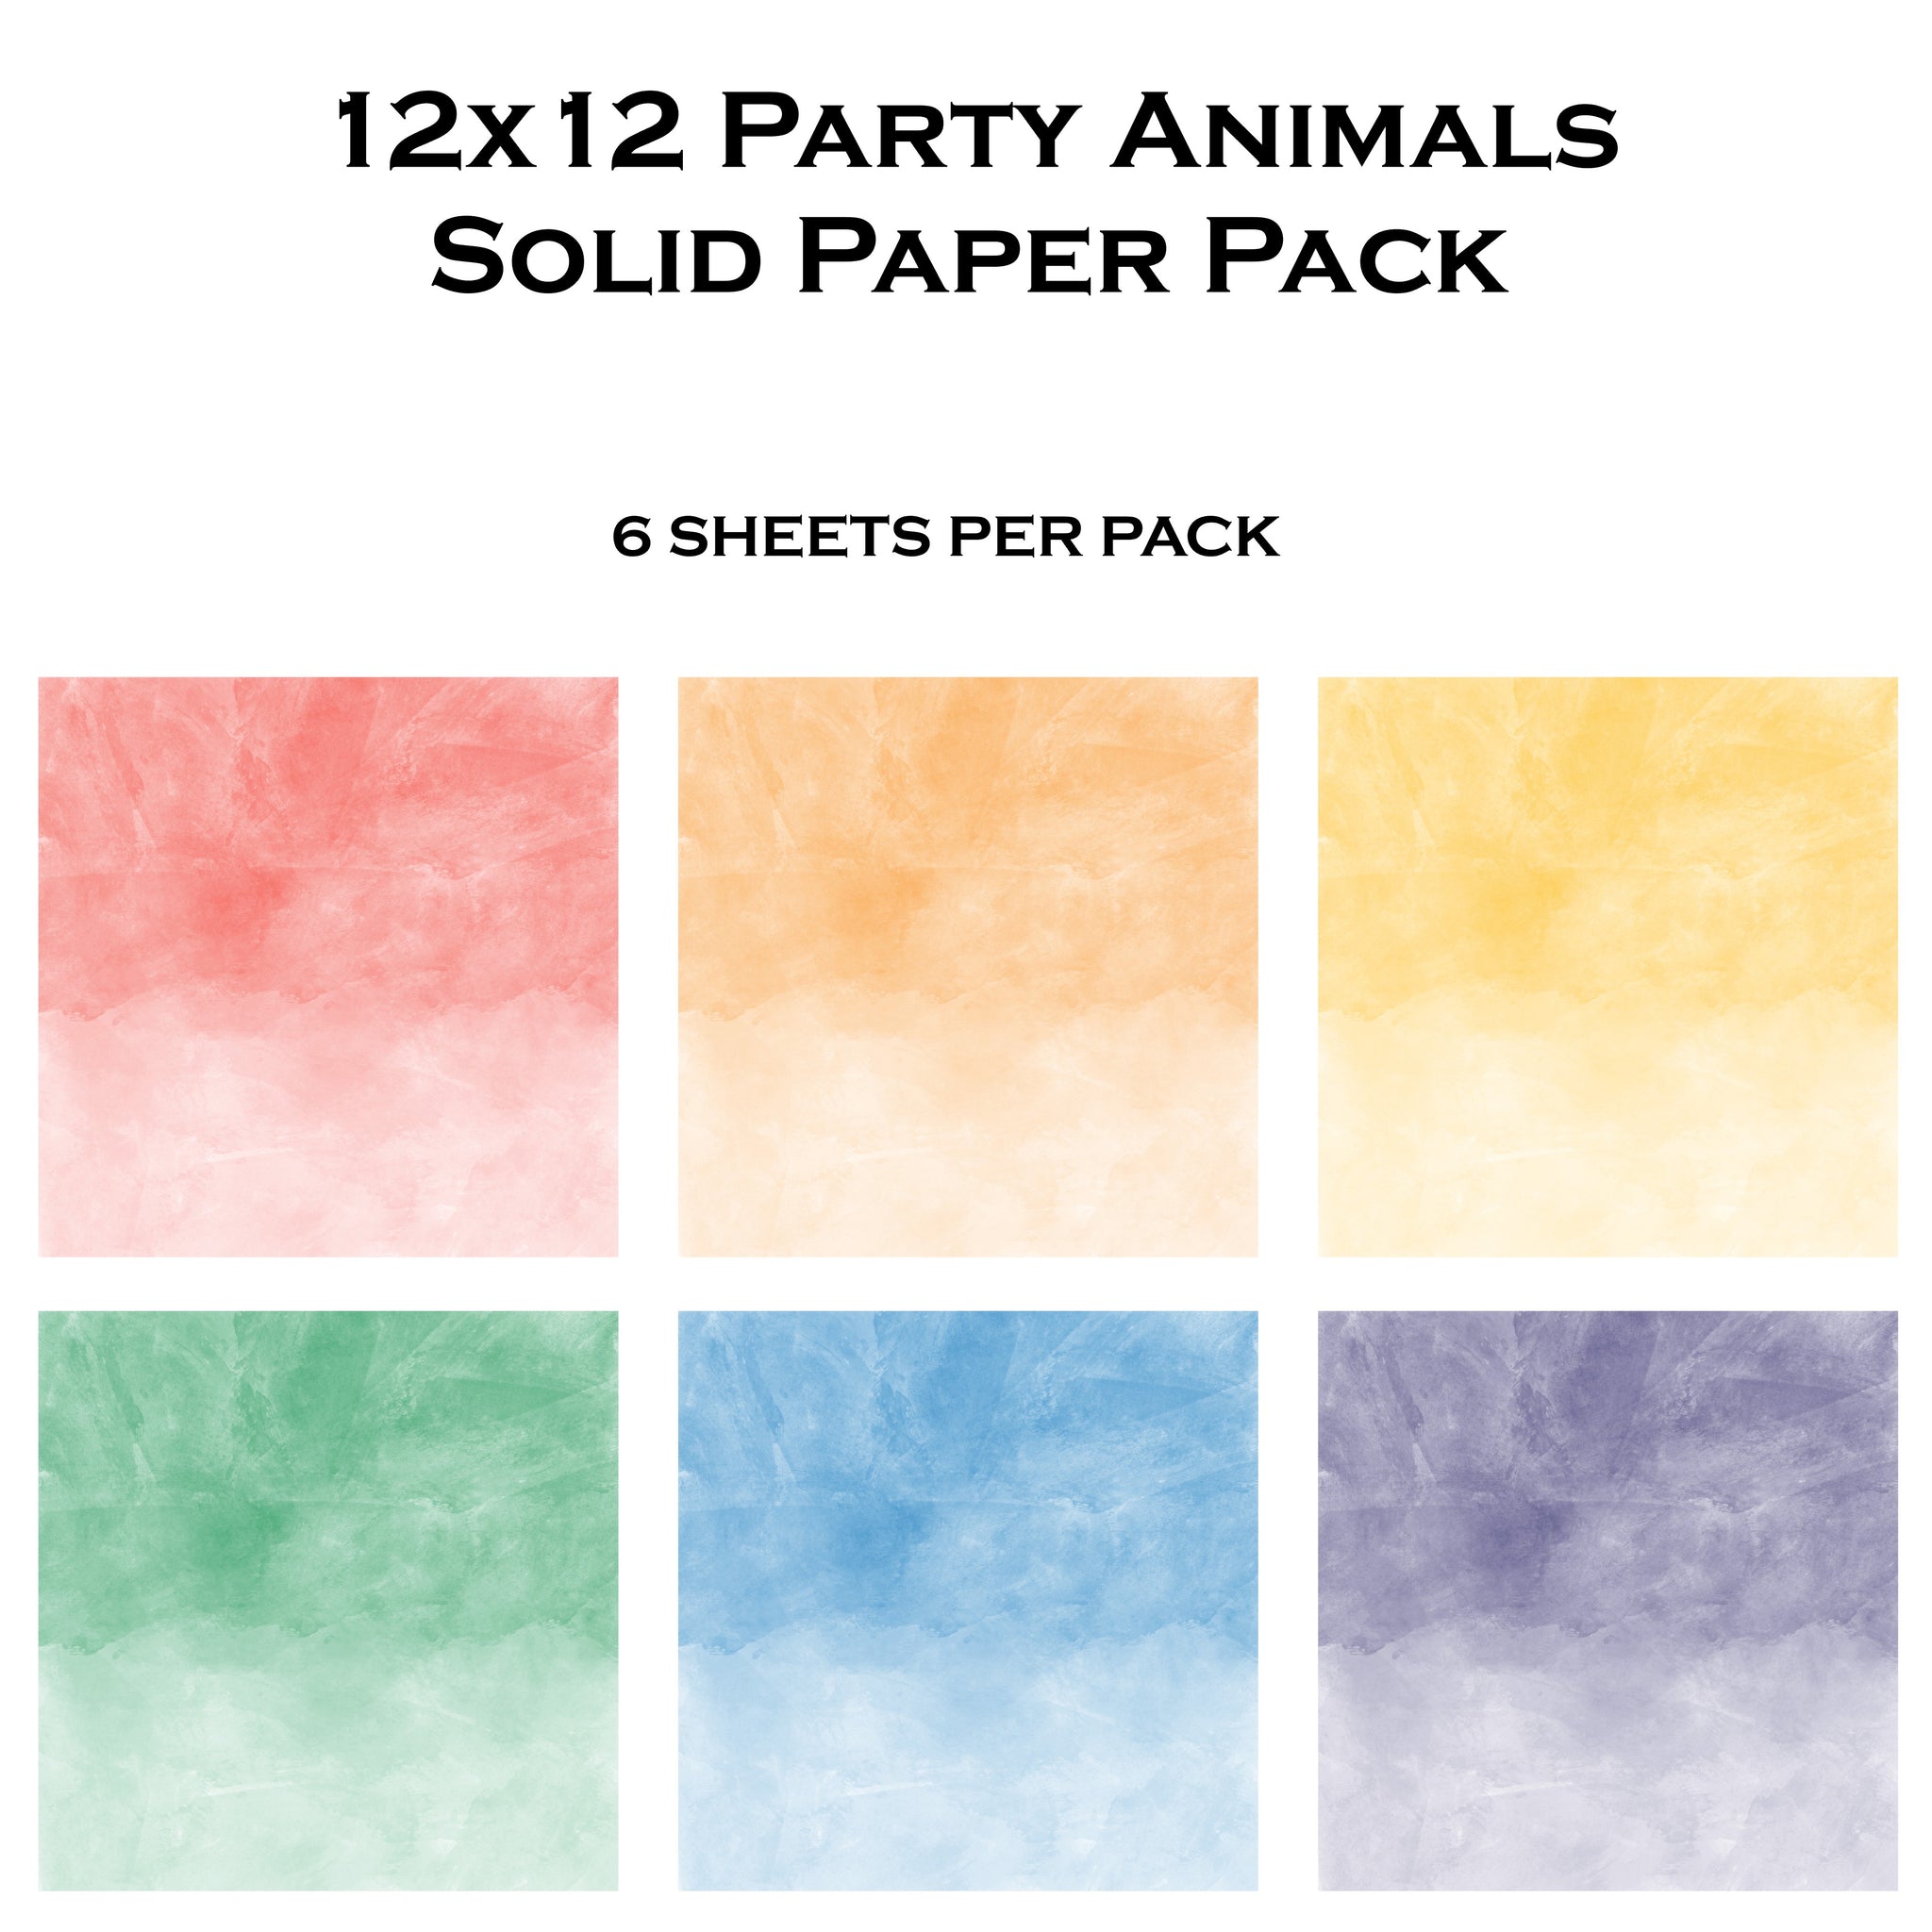 Party Animals 12x12 Solid Paper Pack